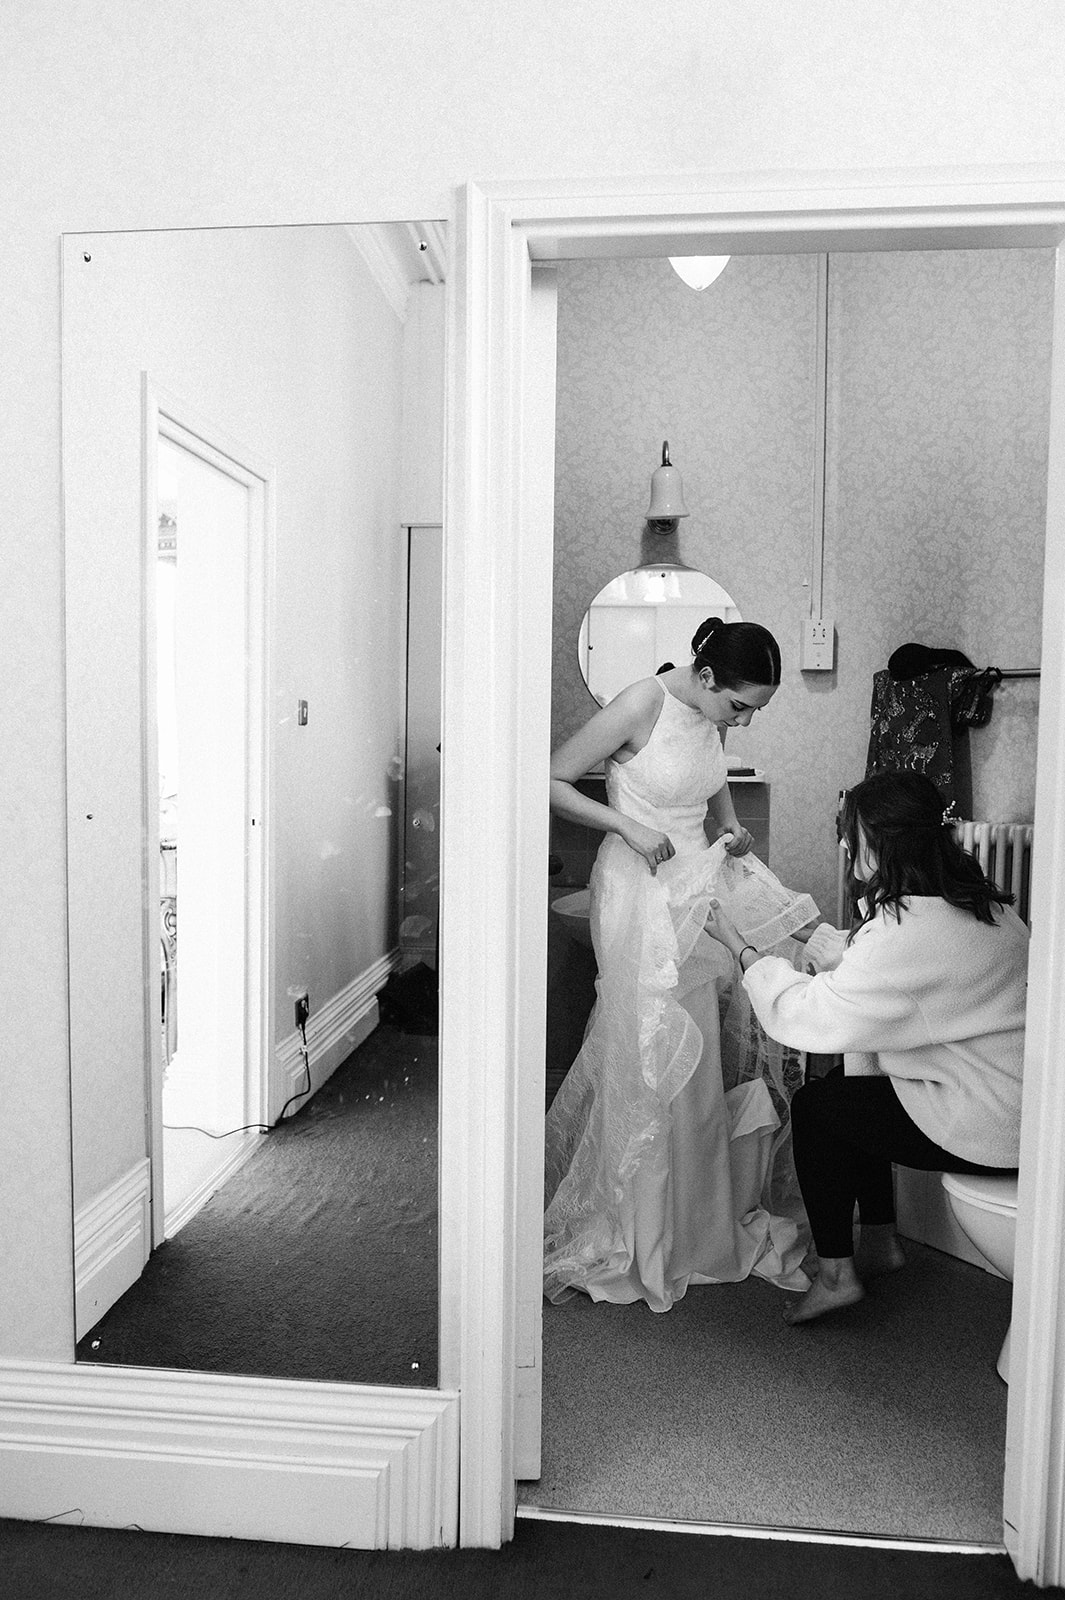 The bride getting dressed in the bathroom at Highbury Hall